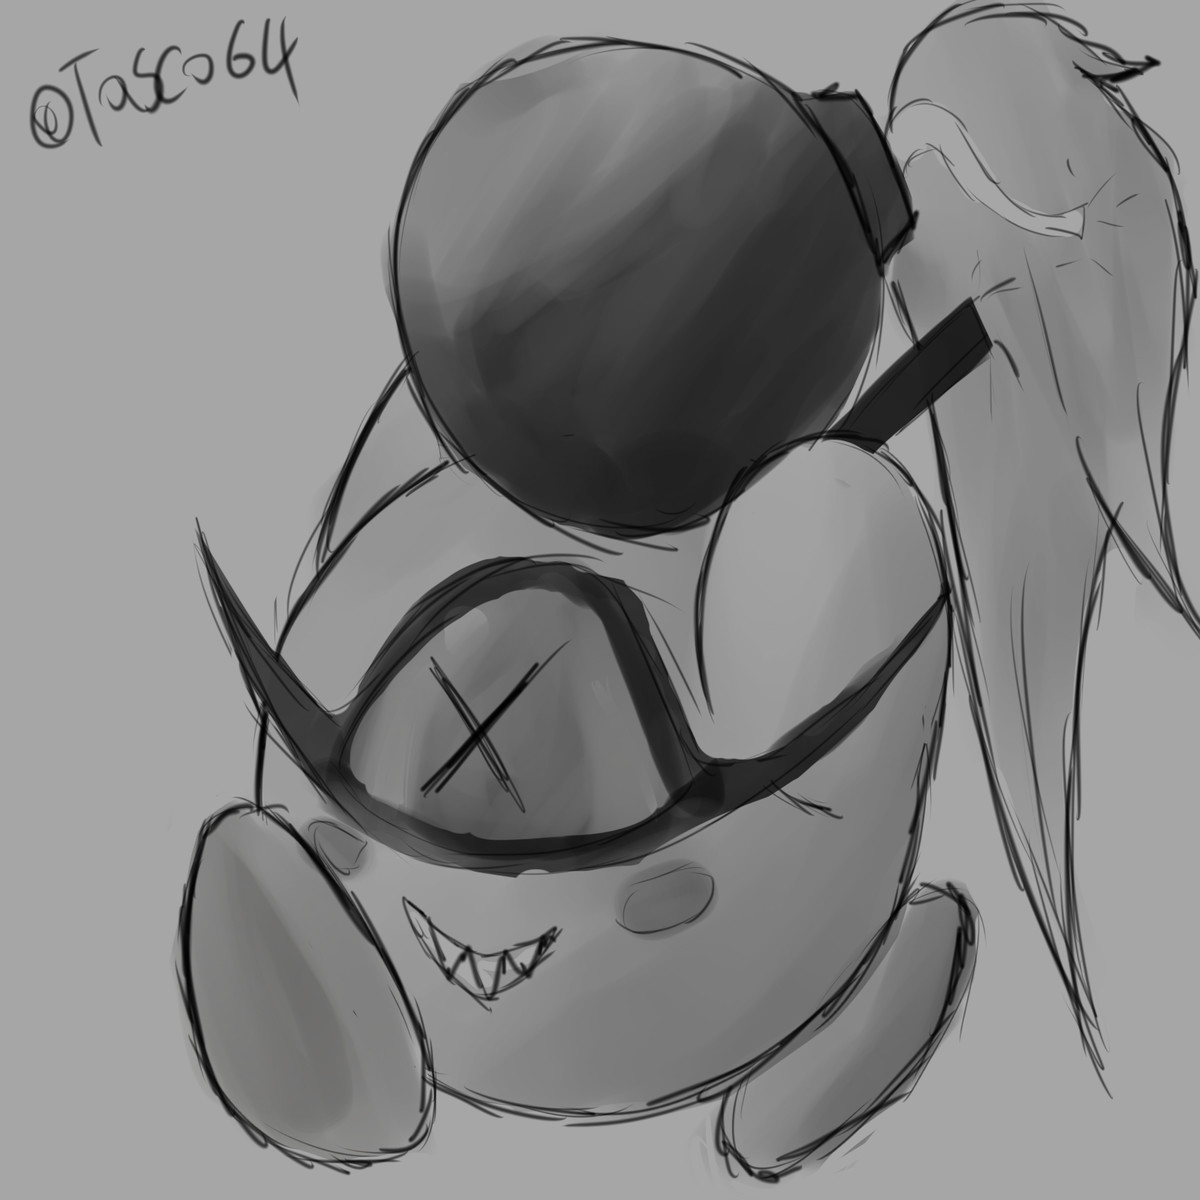 DailyDrawing day 312. new design for bomb kirby join list: SupernerdART (100 subs)Mention History.. Good:^)